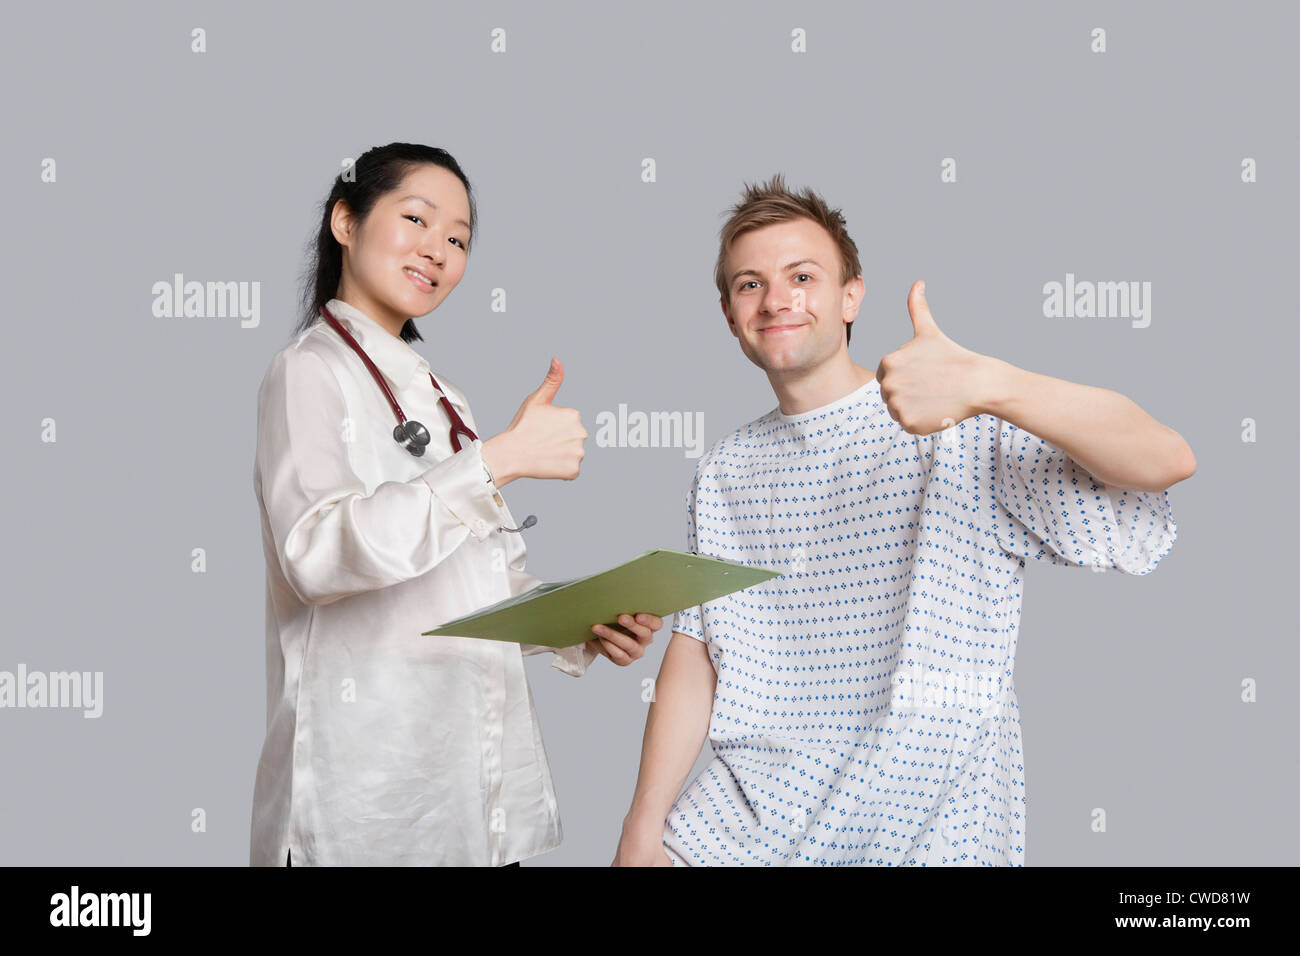 Portrait of happy doctor and patient gesturing thumbs up Stock Photo